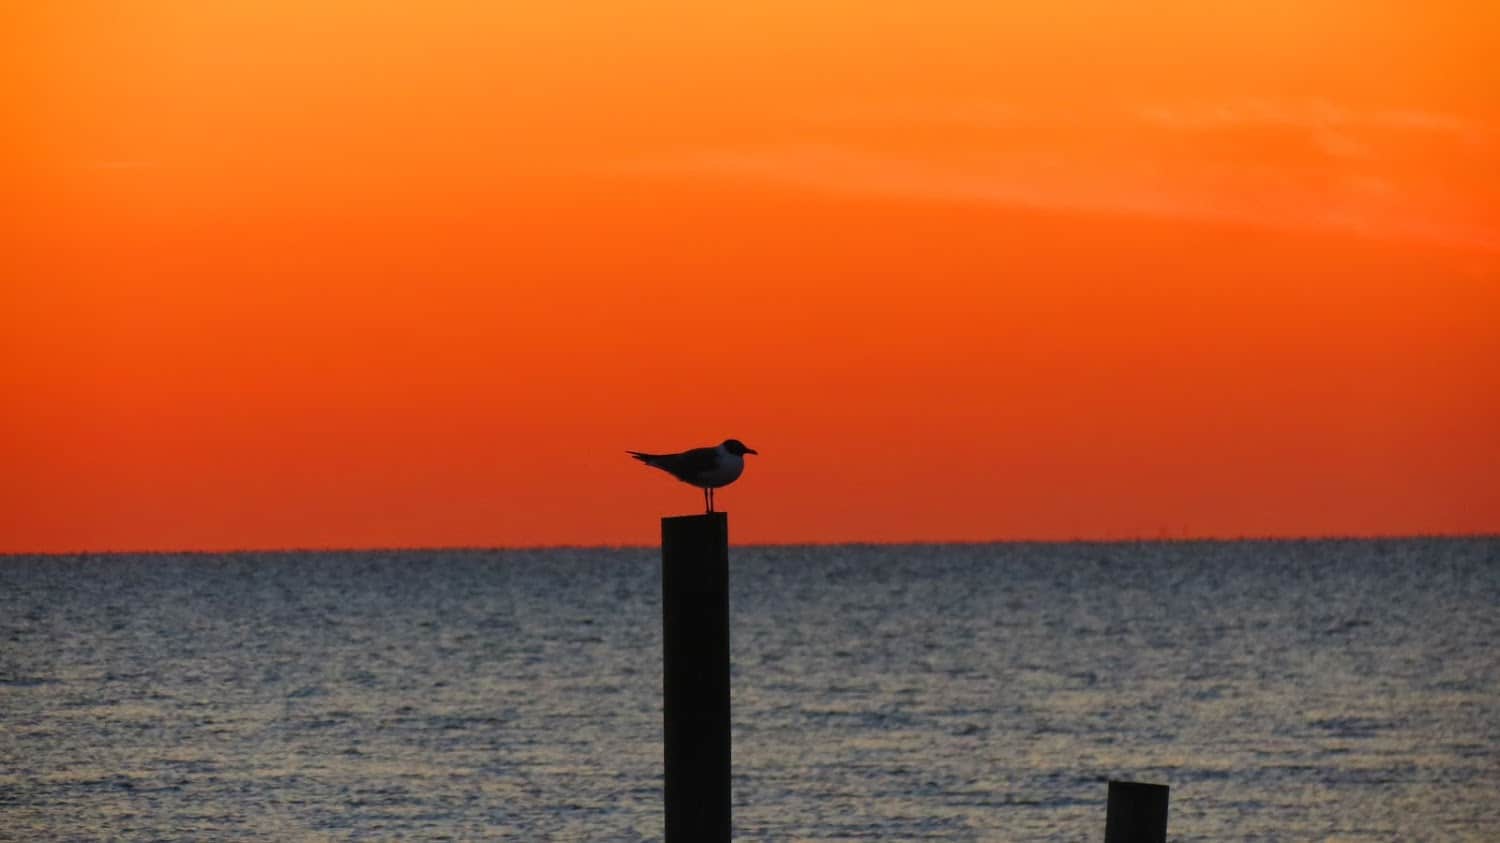 A seagull and the sunset.